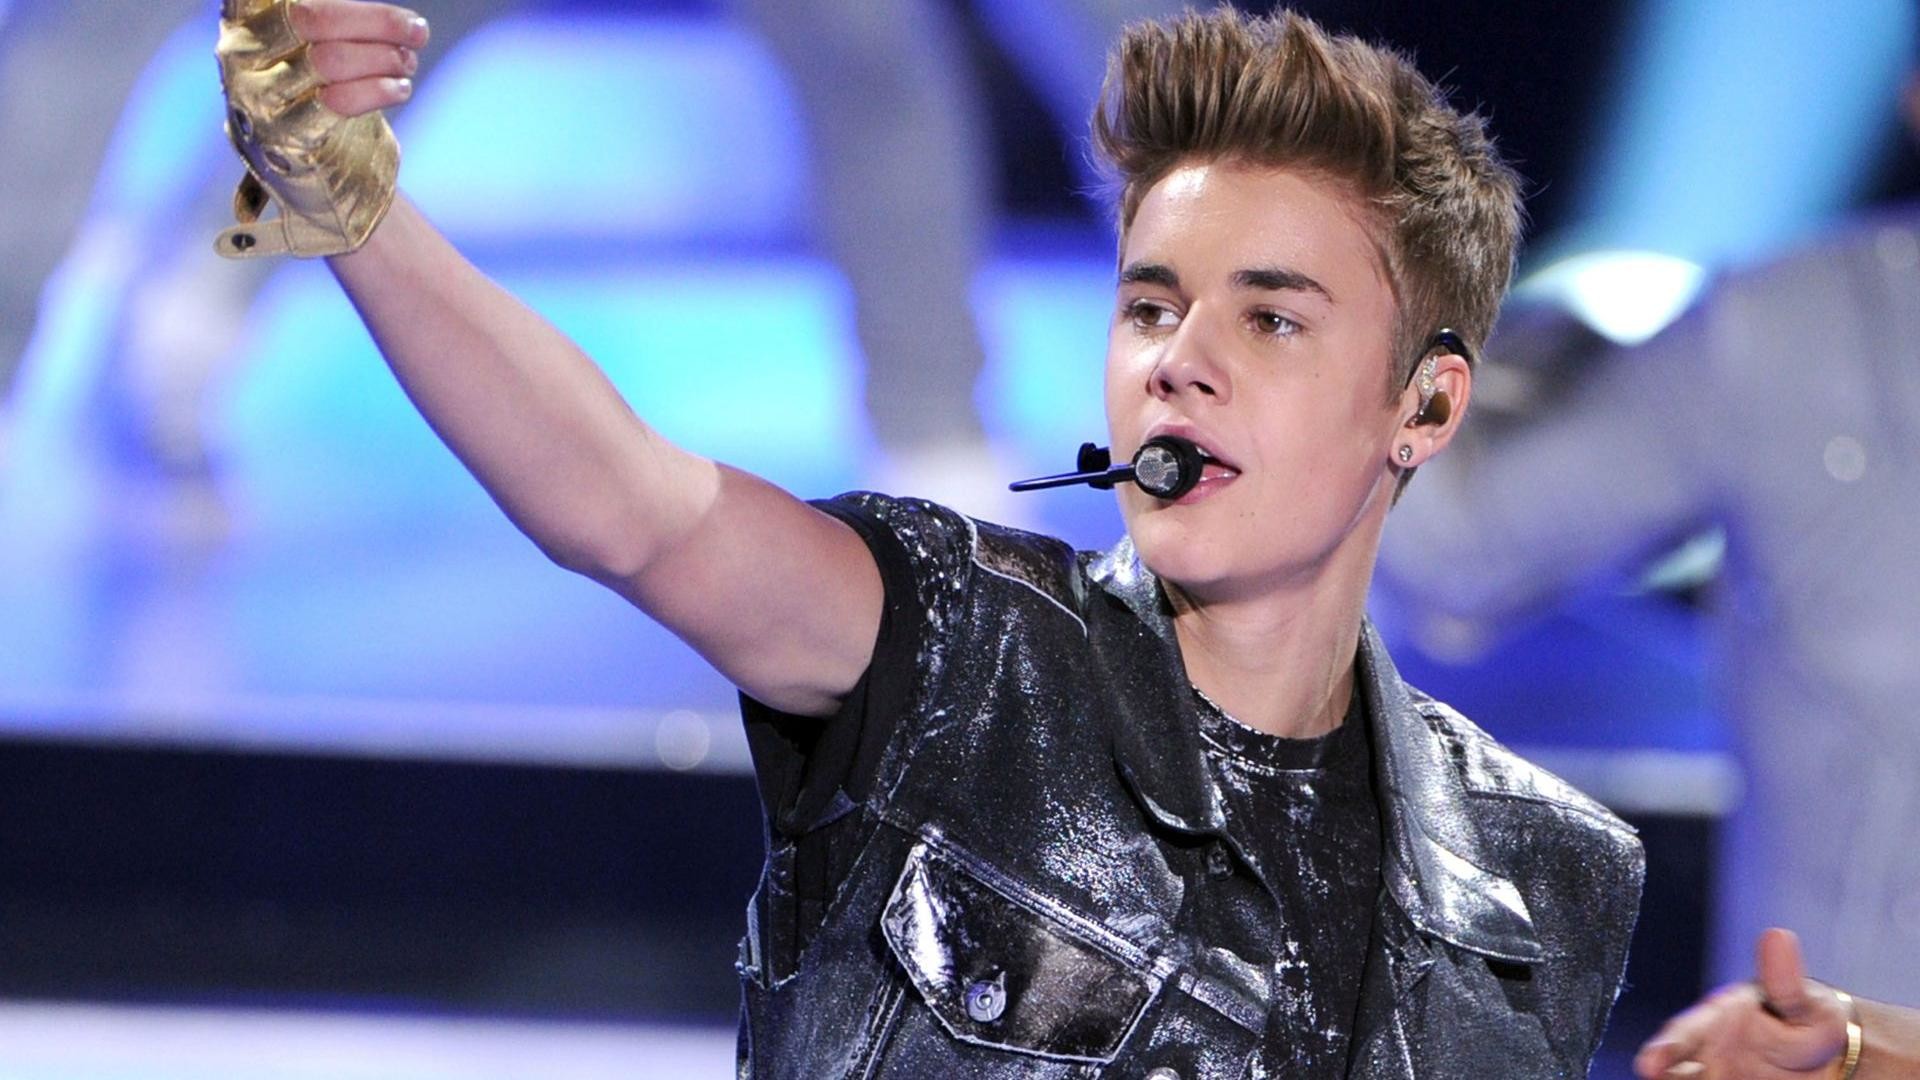 Justin Bieber Hottest Pictures for His 22nd Birthday. We don't know about  you